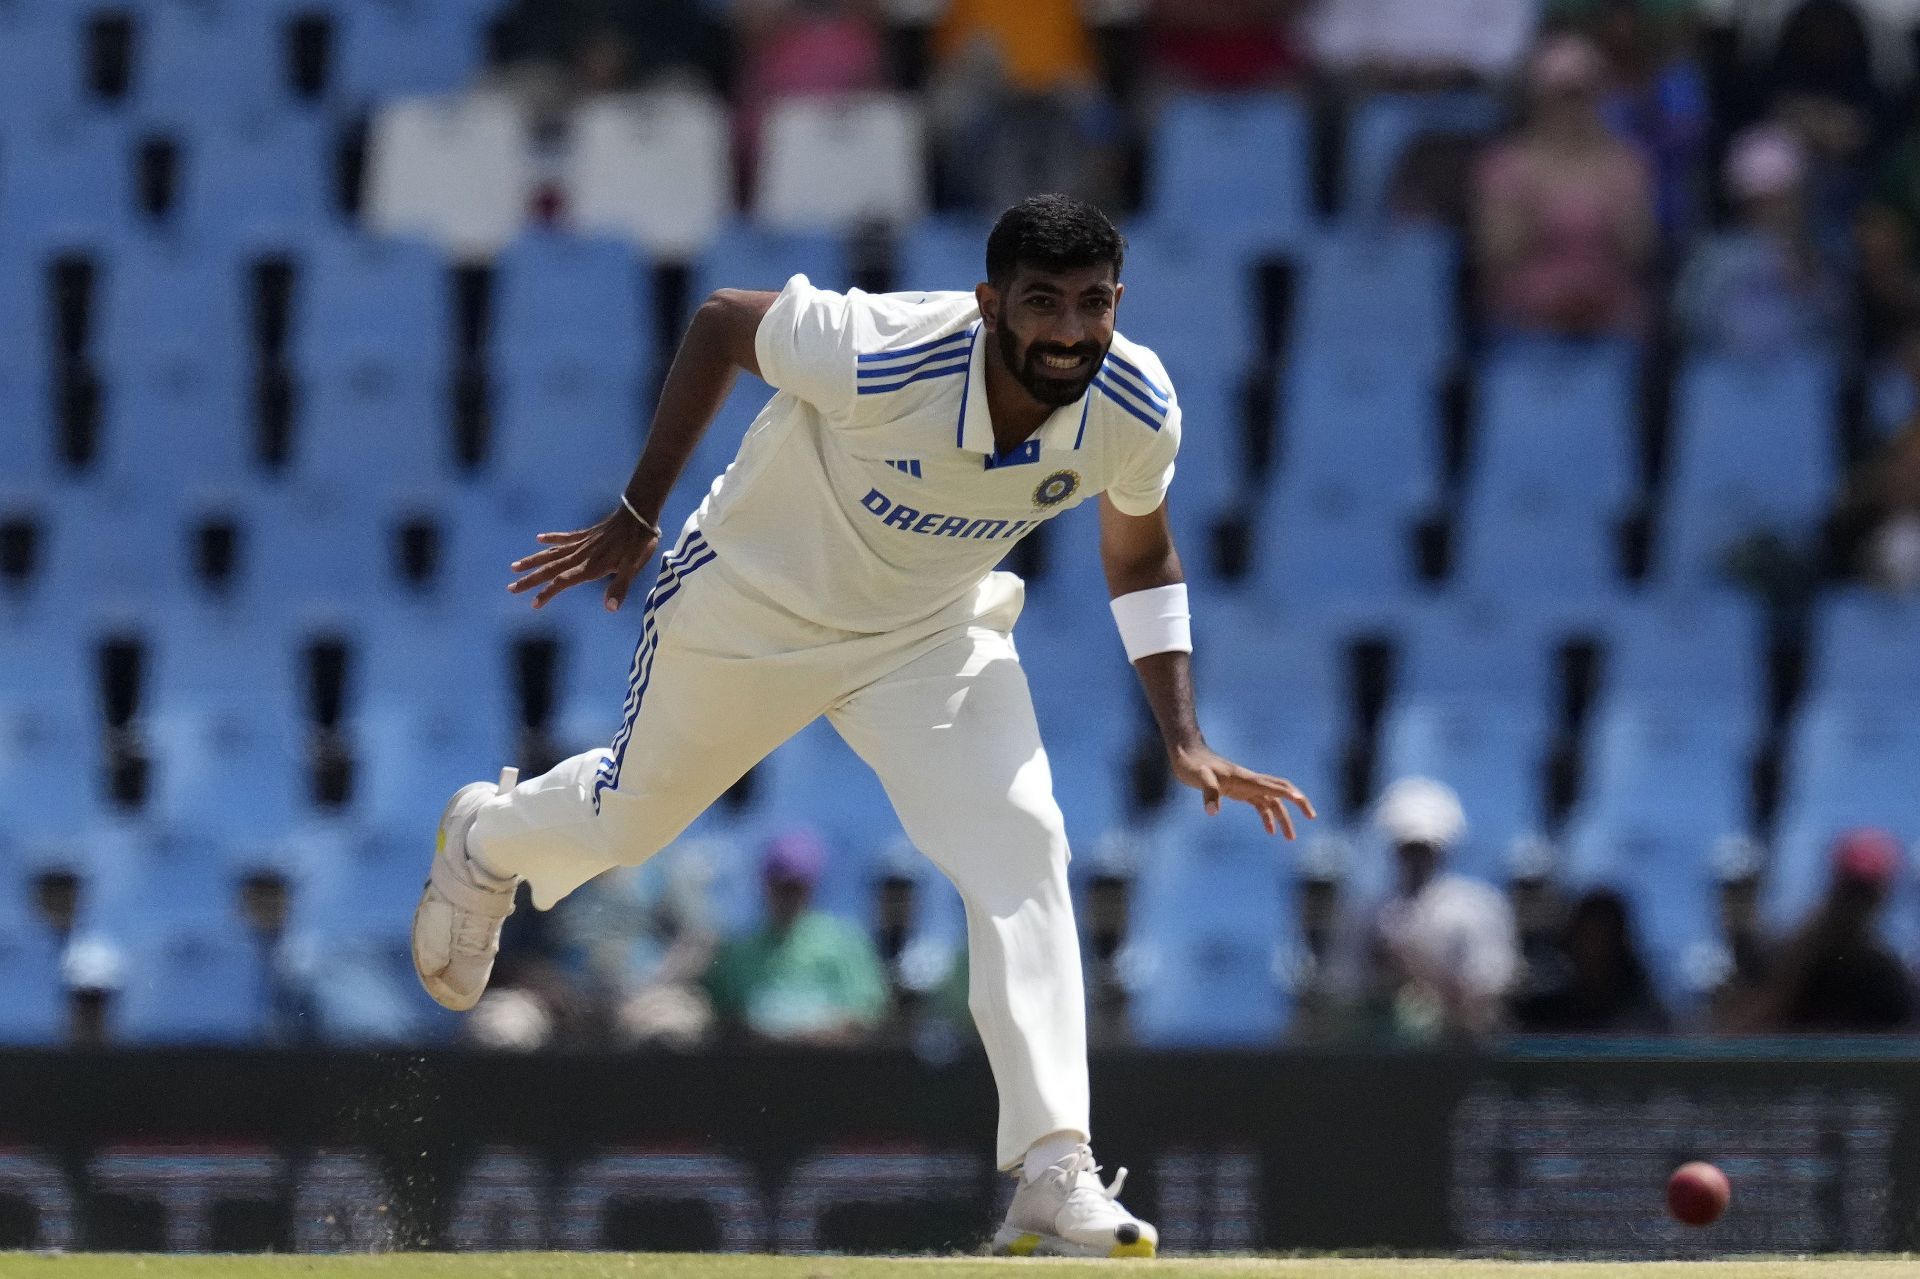 Jasprit Bumrah bowled almost 27 overs without any problems